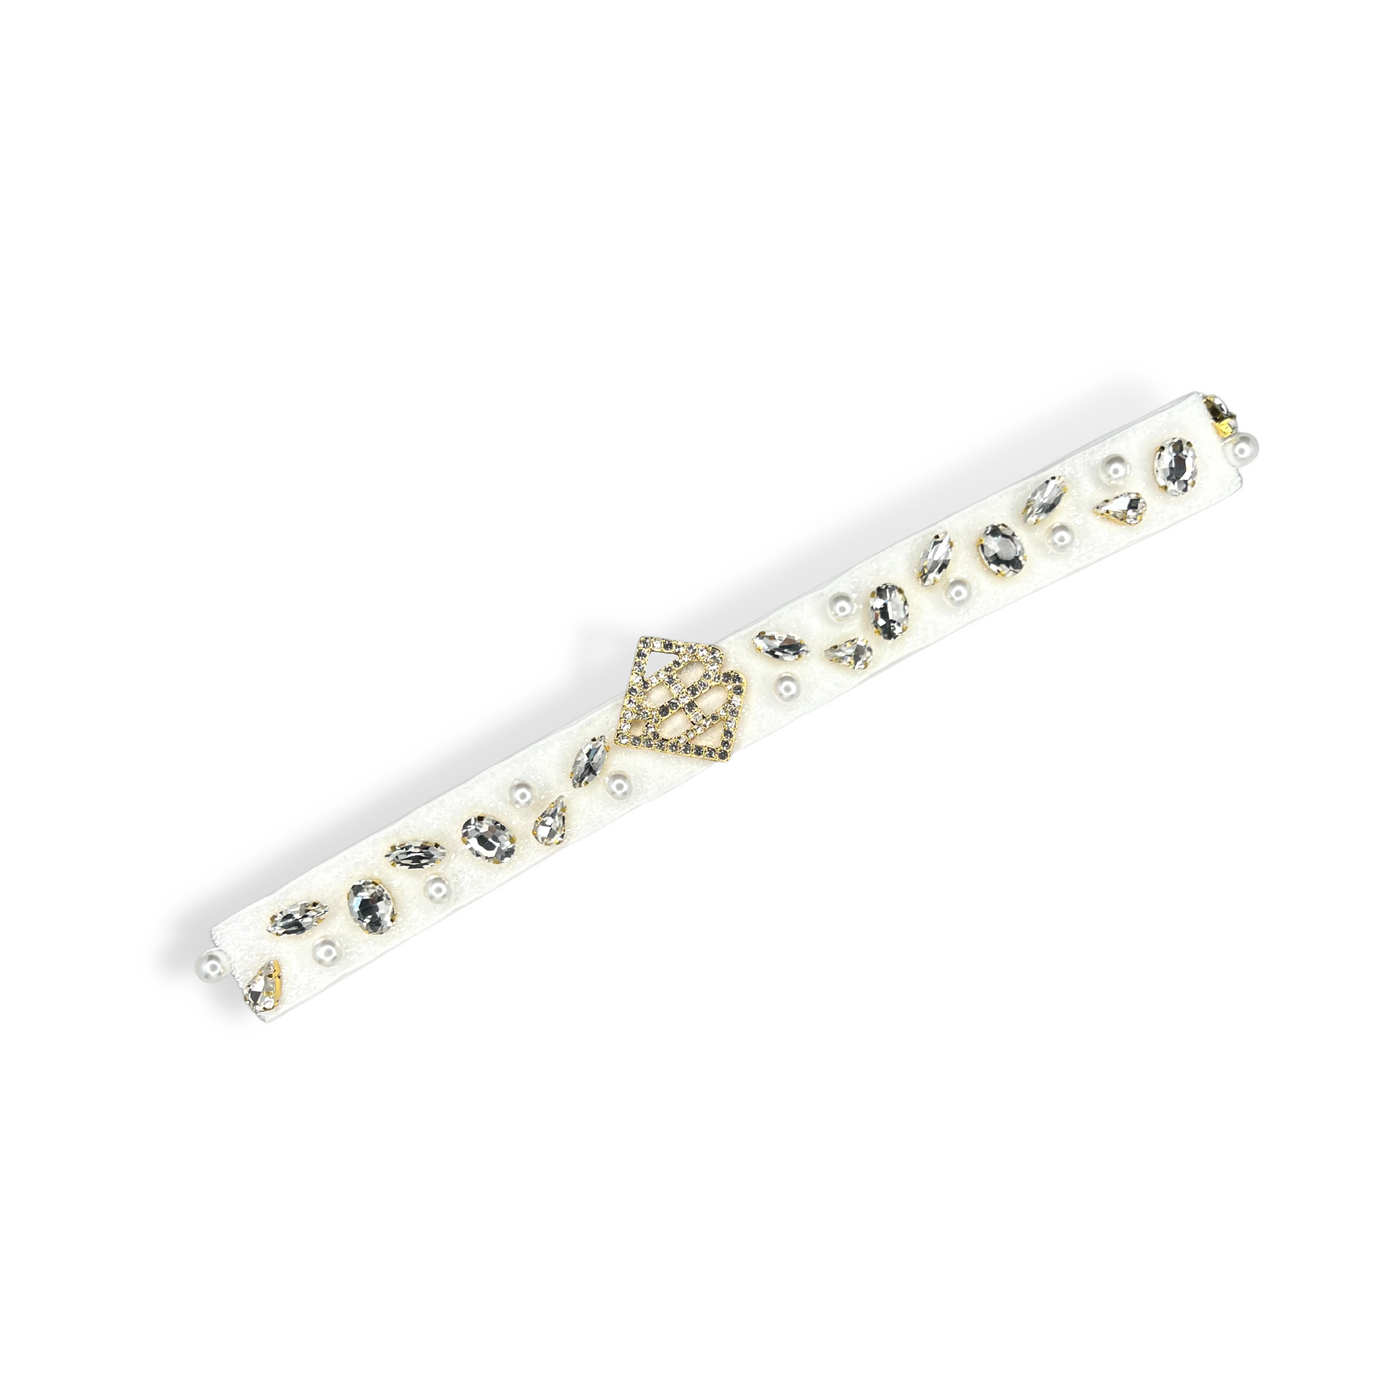 White Hat Band with Crystals & Pearls